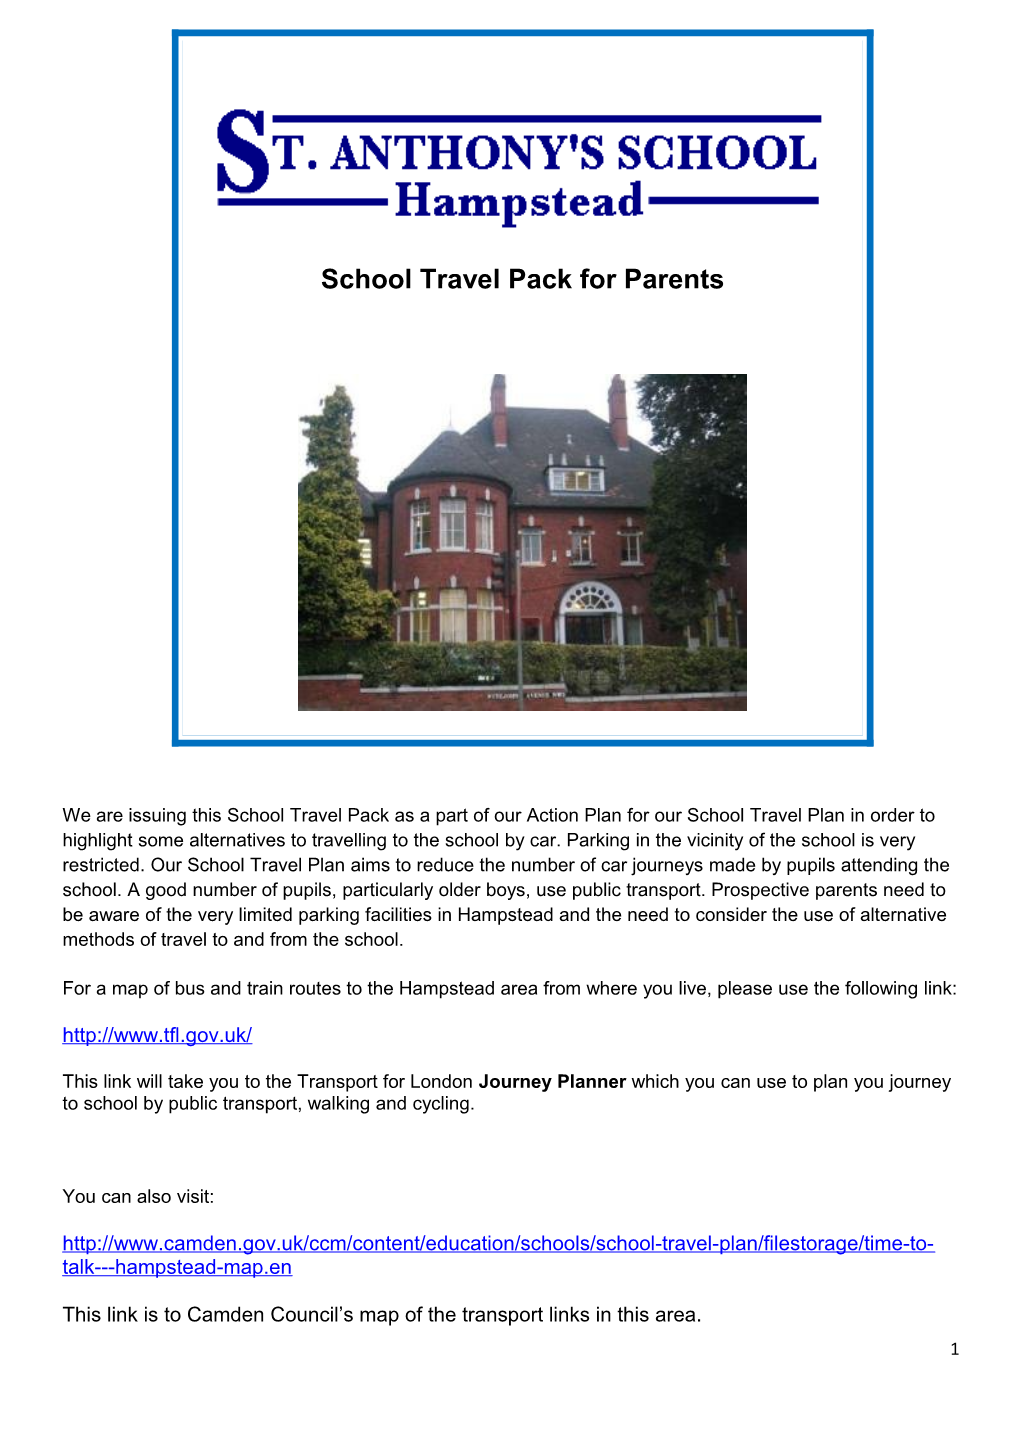 We Are Issuing This School Travel Pack As a Part of Our Action Plan for Our School Travel